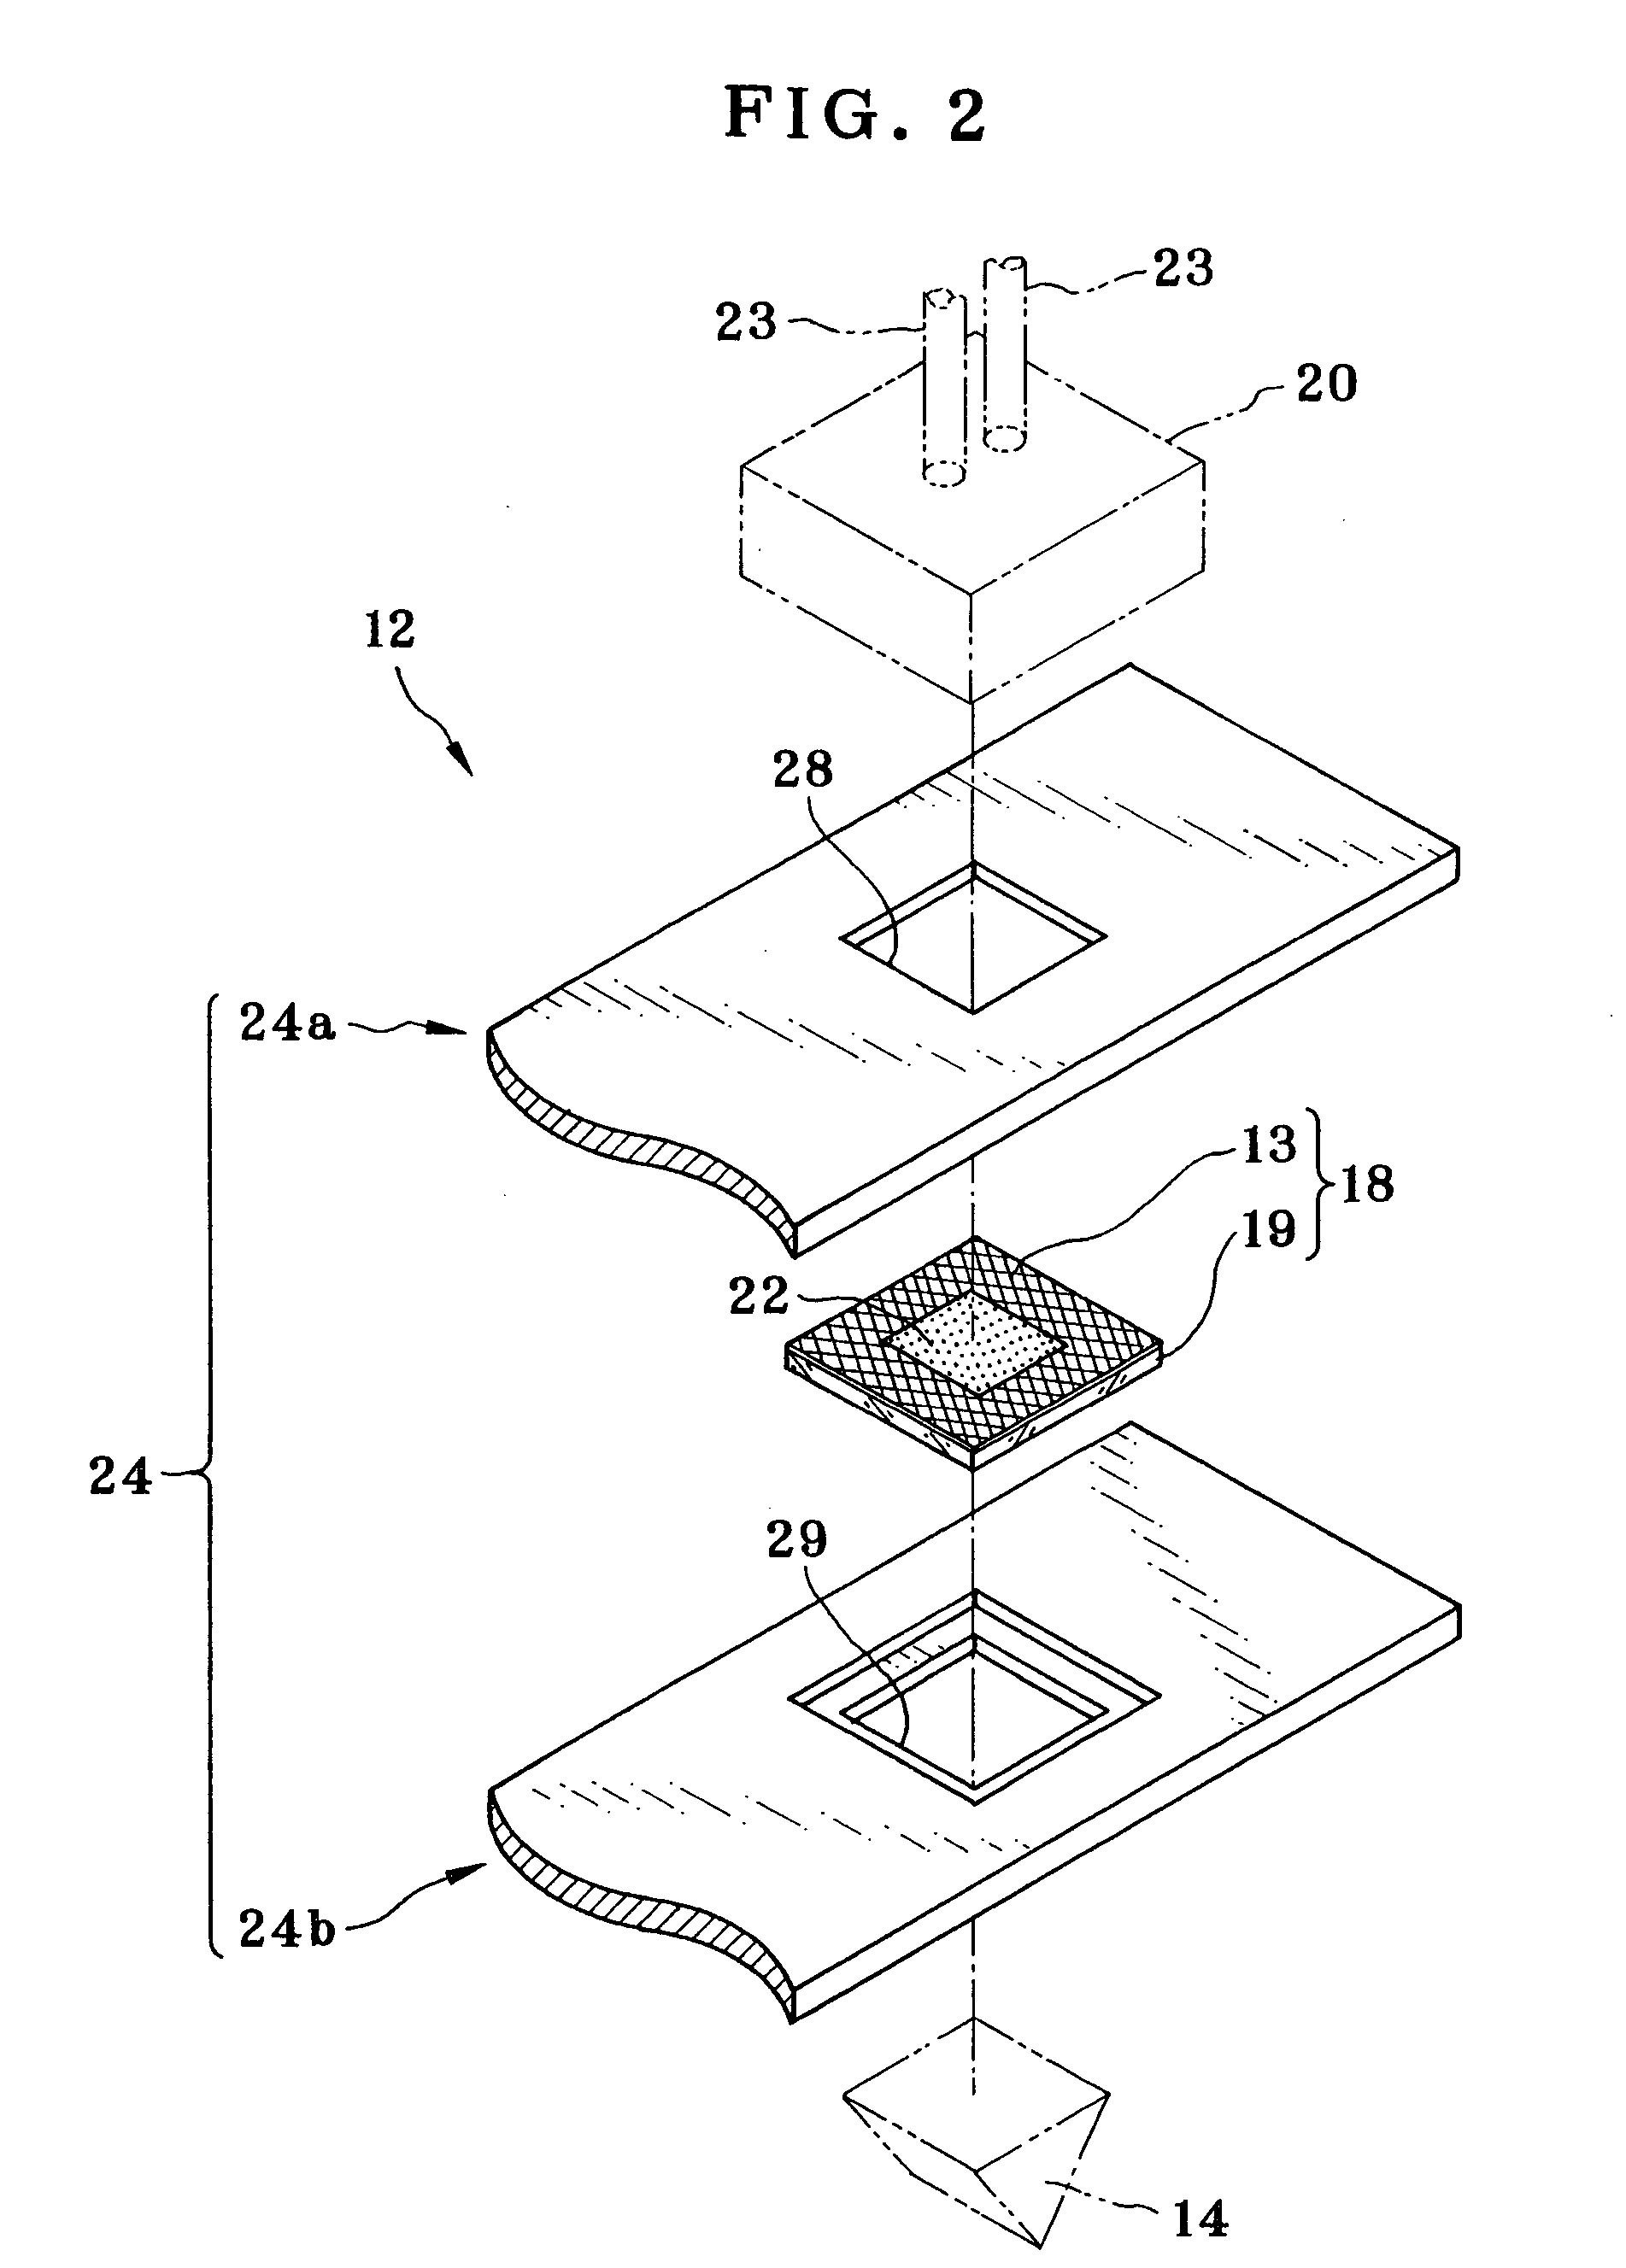 Apparatus for assay in utilizing attenuated total reflection